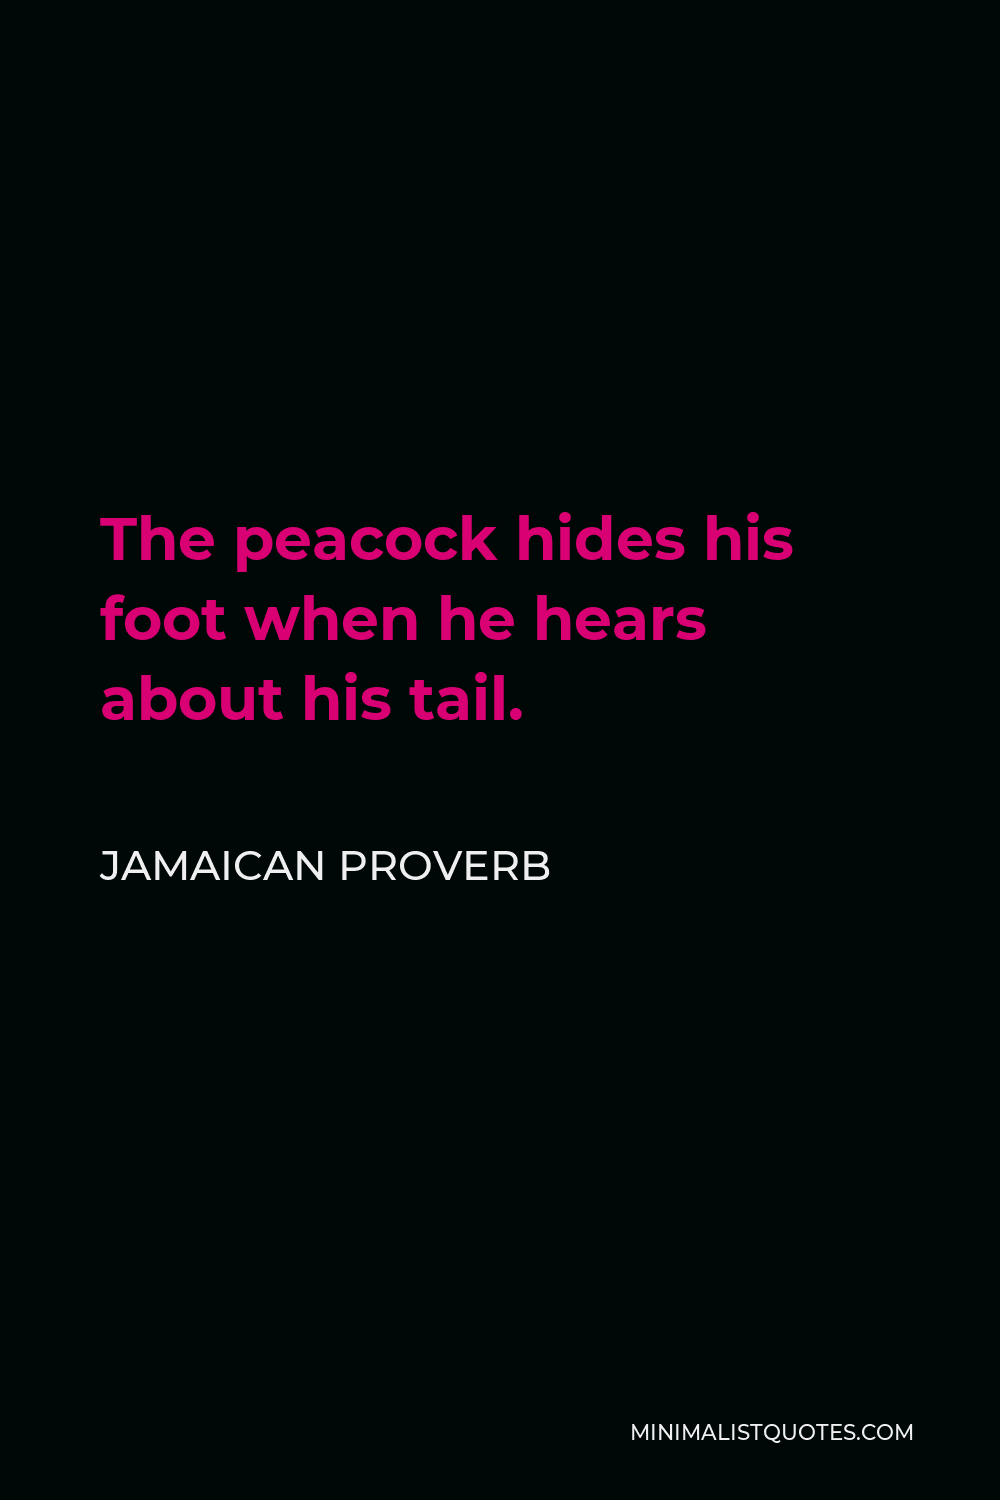 Jamaican Proverb Quote - The peacock hides his foot when he hears about his tail.